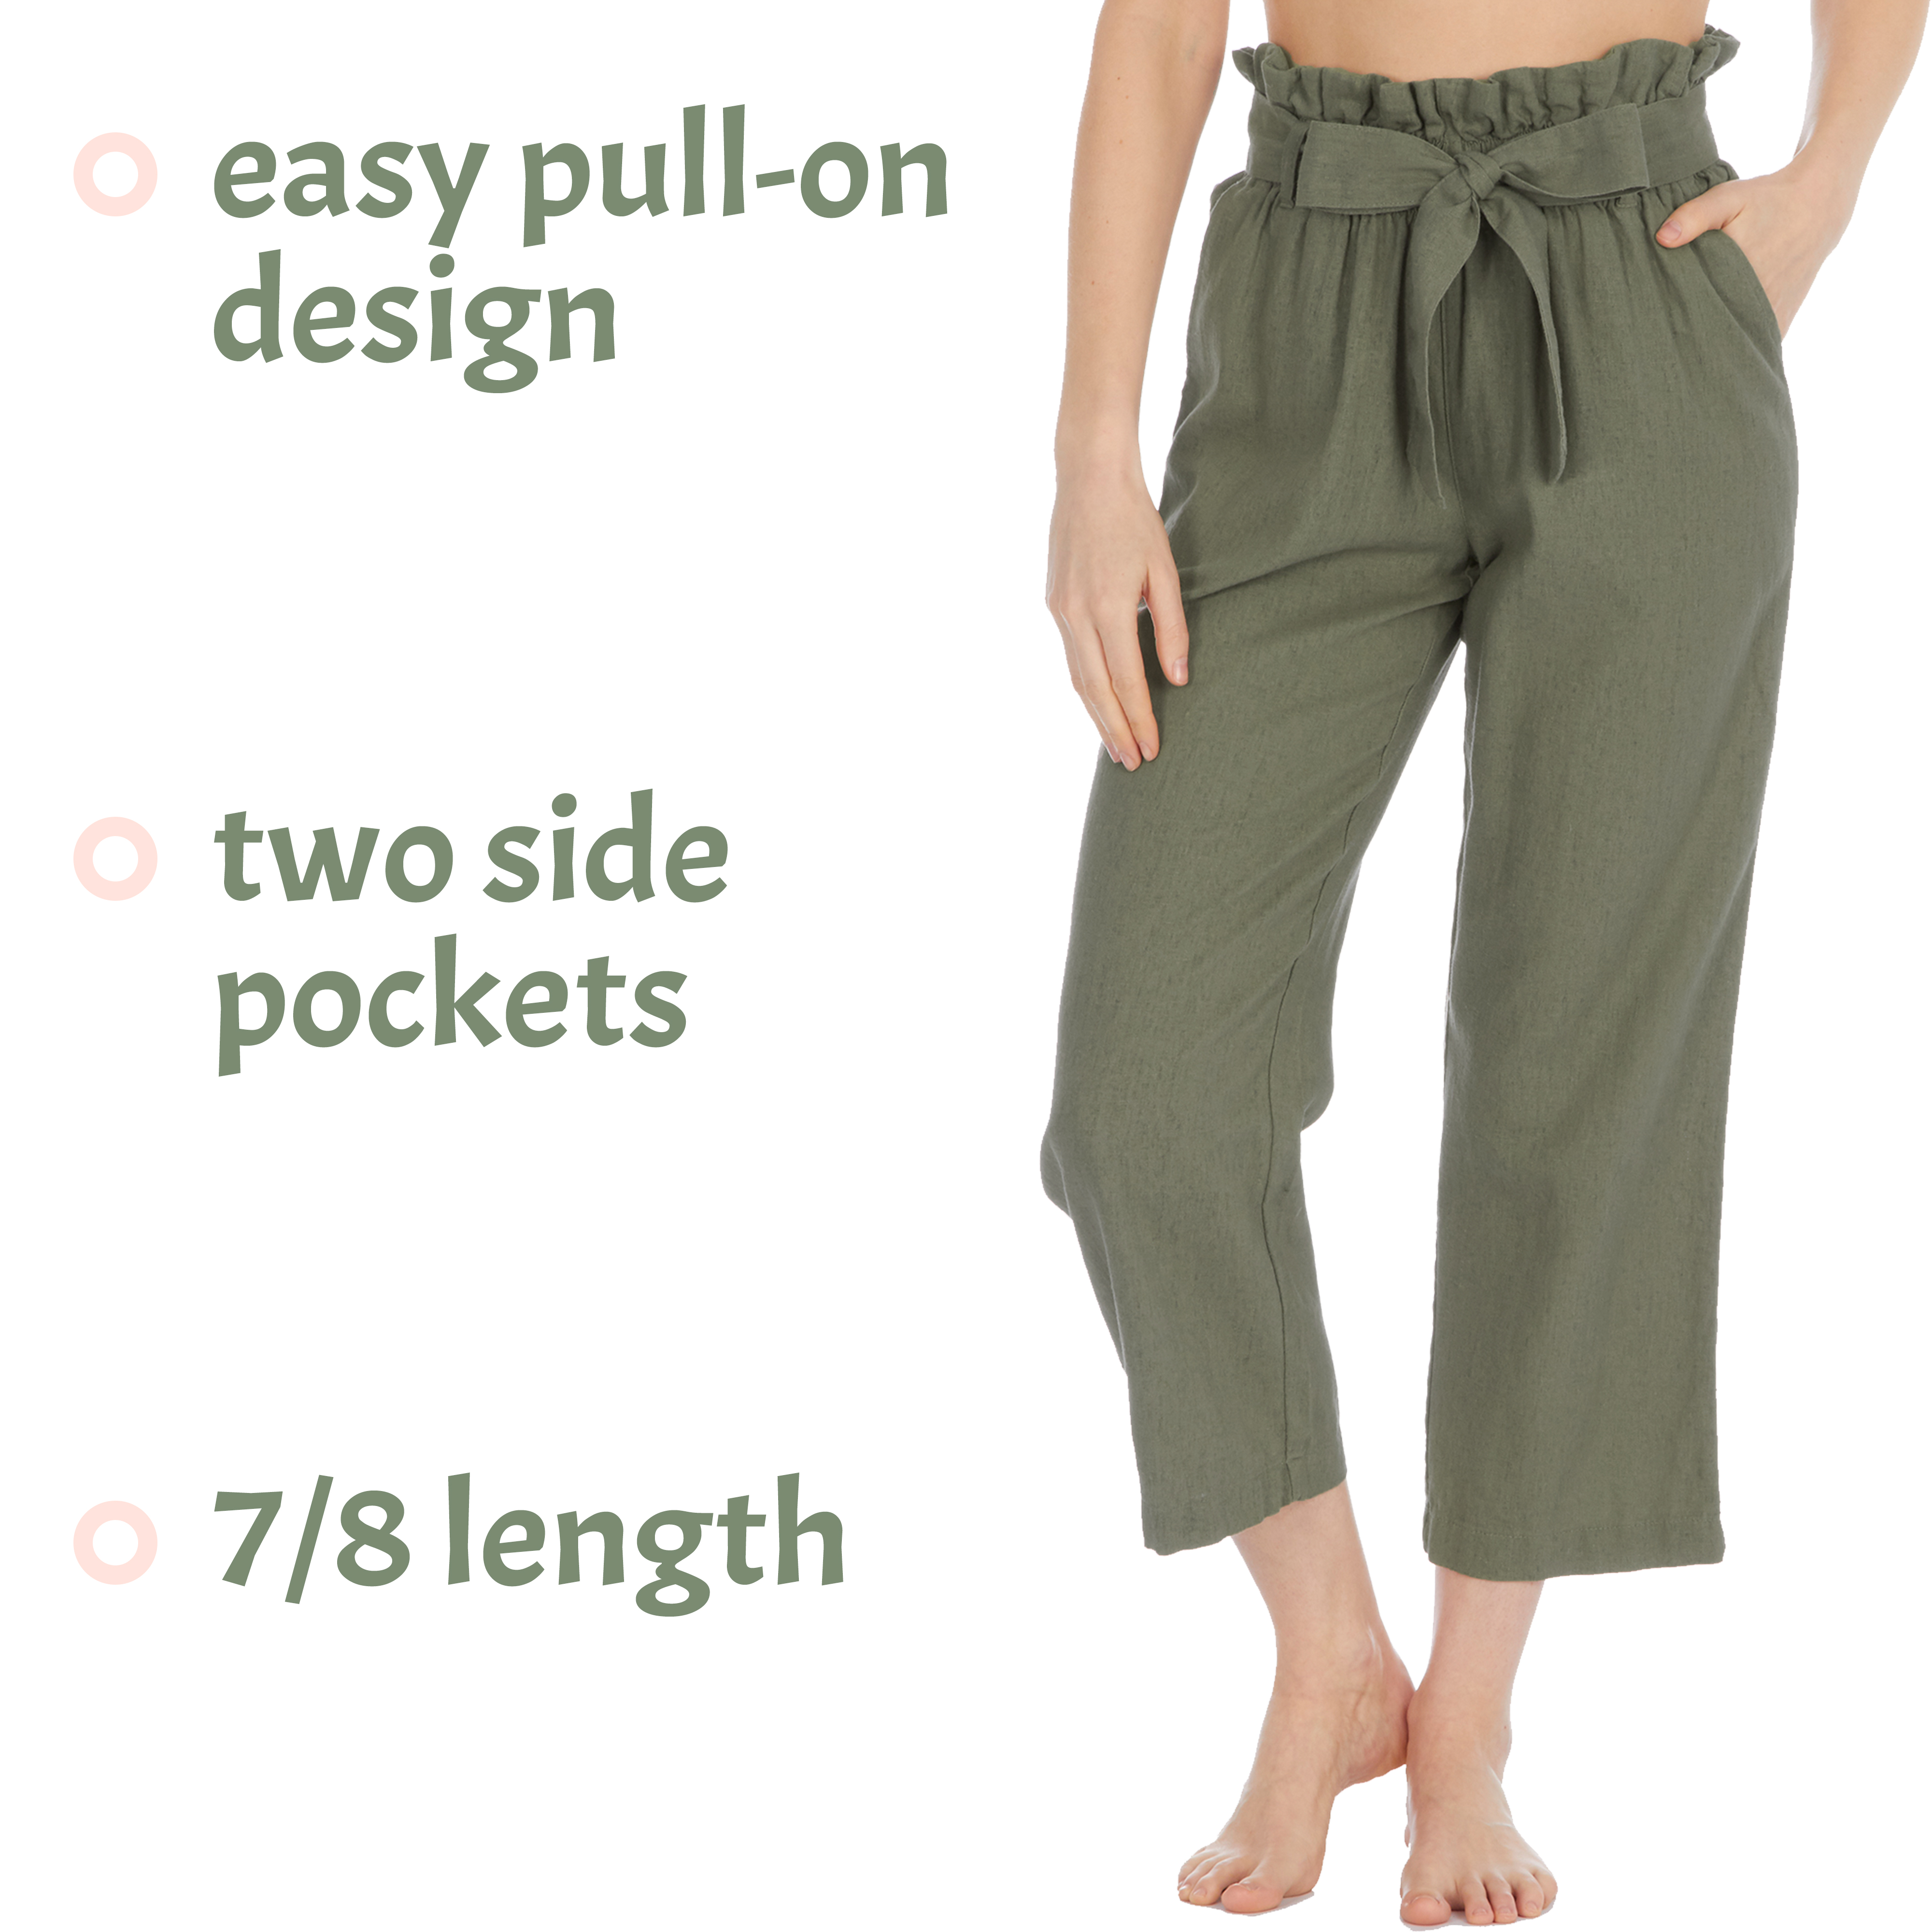 Ladies Linen Trousers Women's Fully Elasticated Pull On Pants Sizes UK 10-20